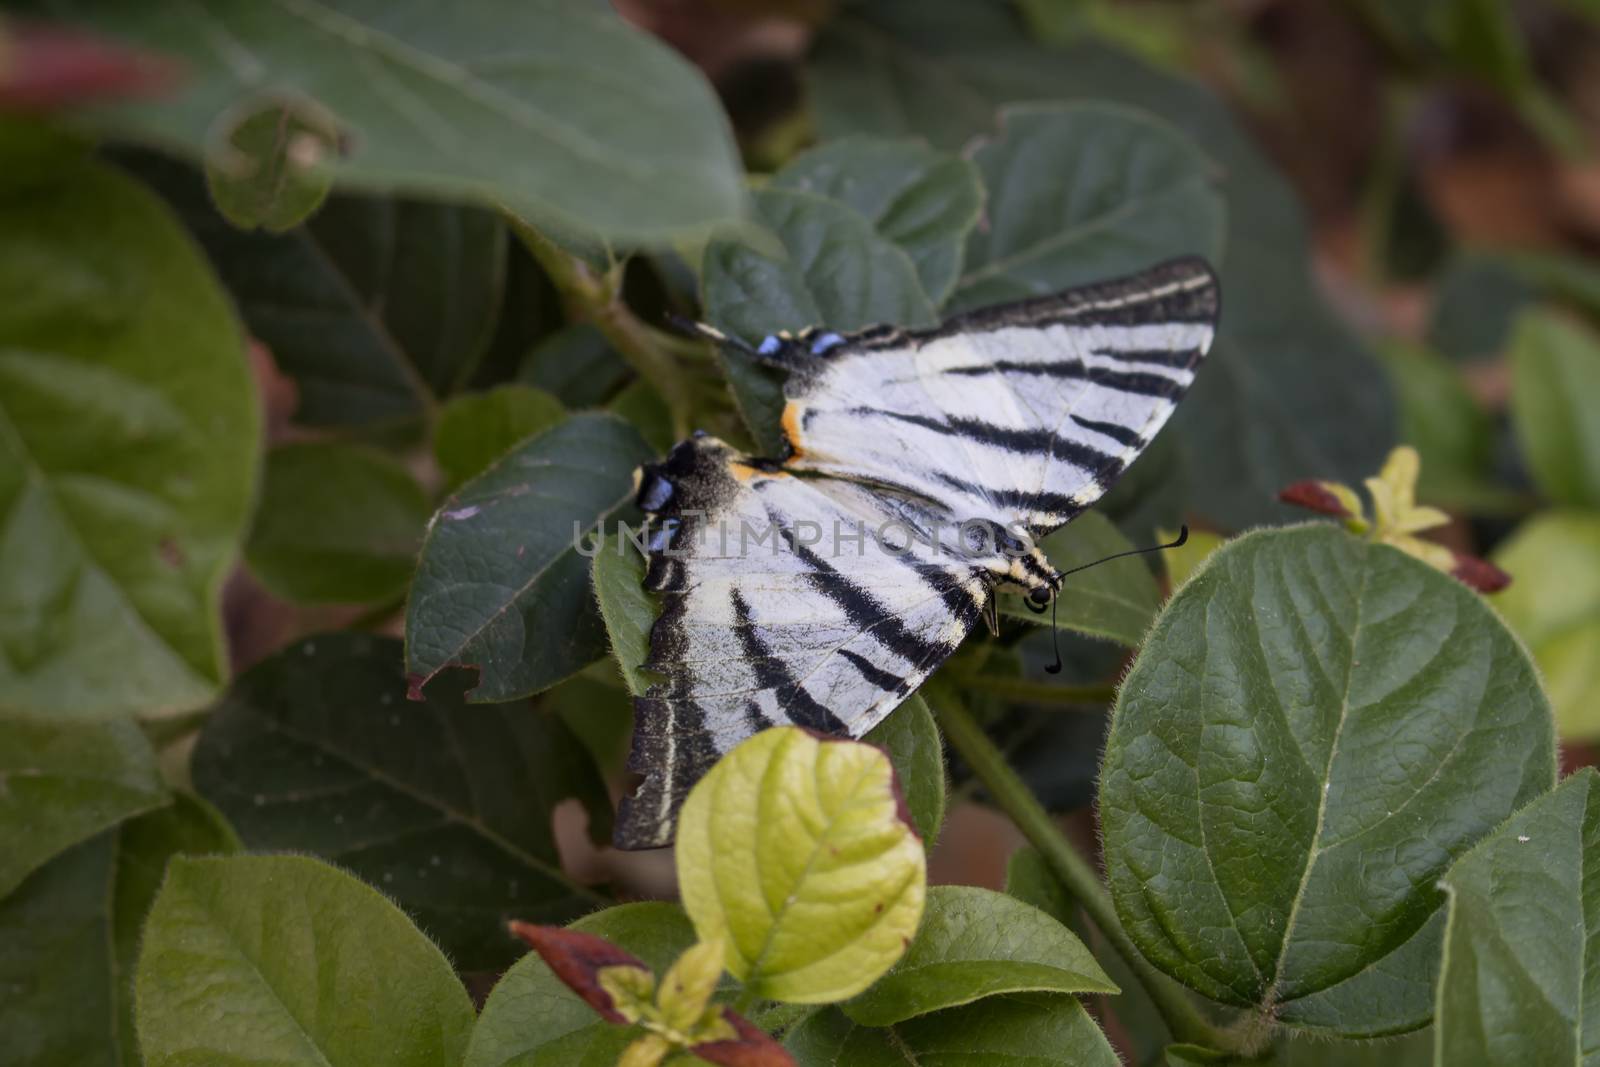 Calm moment of a butterfly with black and white stripes on a bush, among leaves.